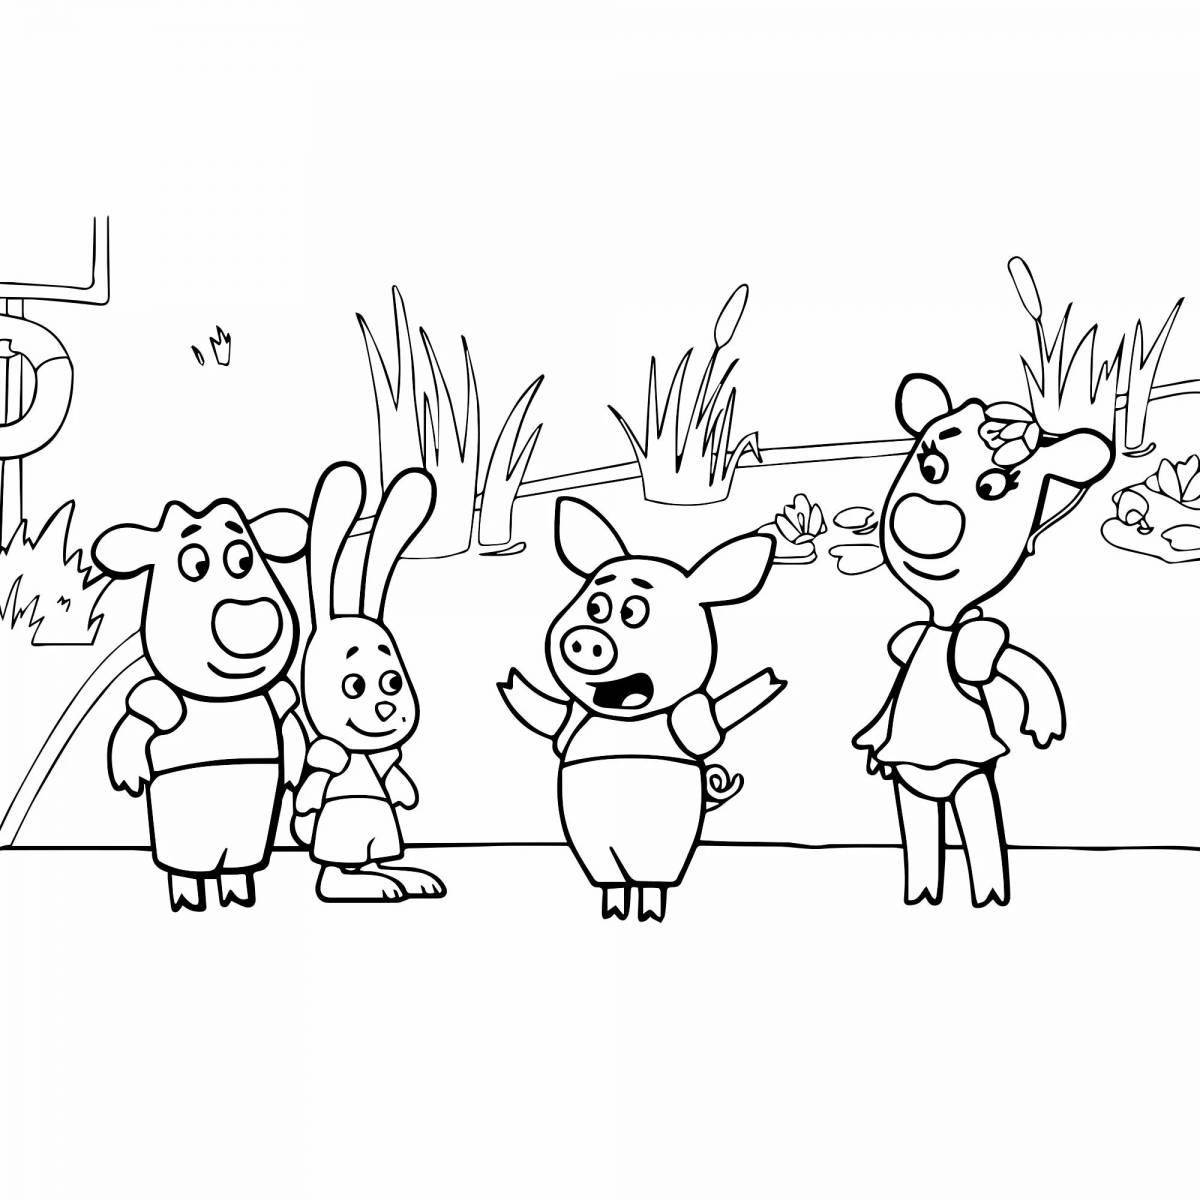 Color-frenzy cartoon coloring pages for kids 4-5 years old